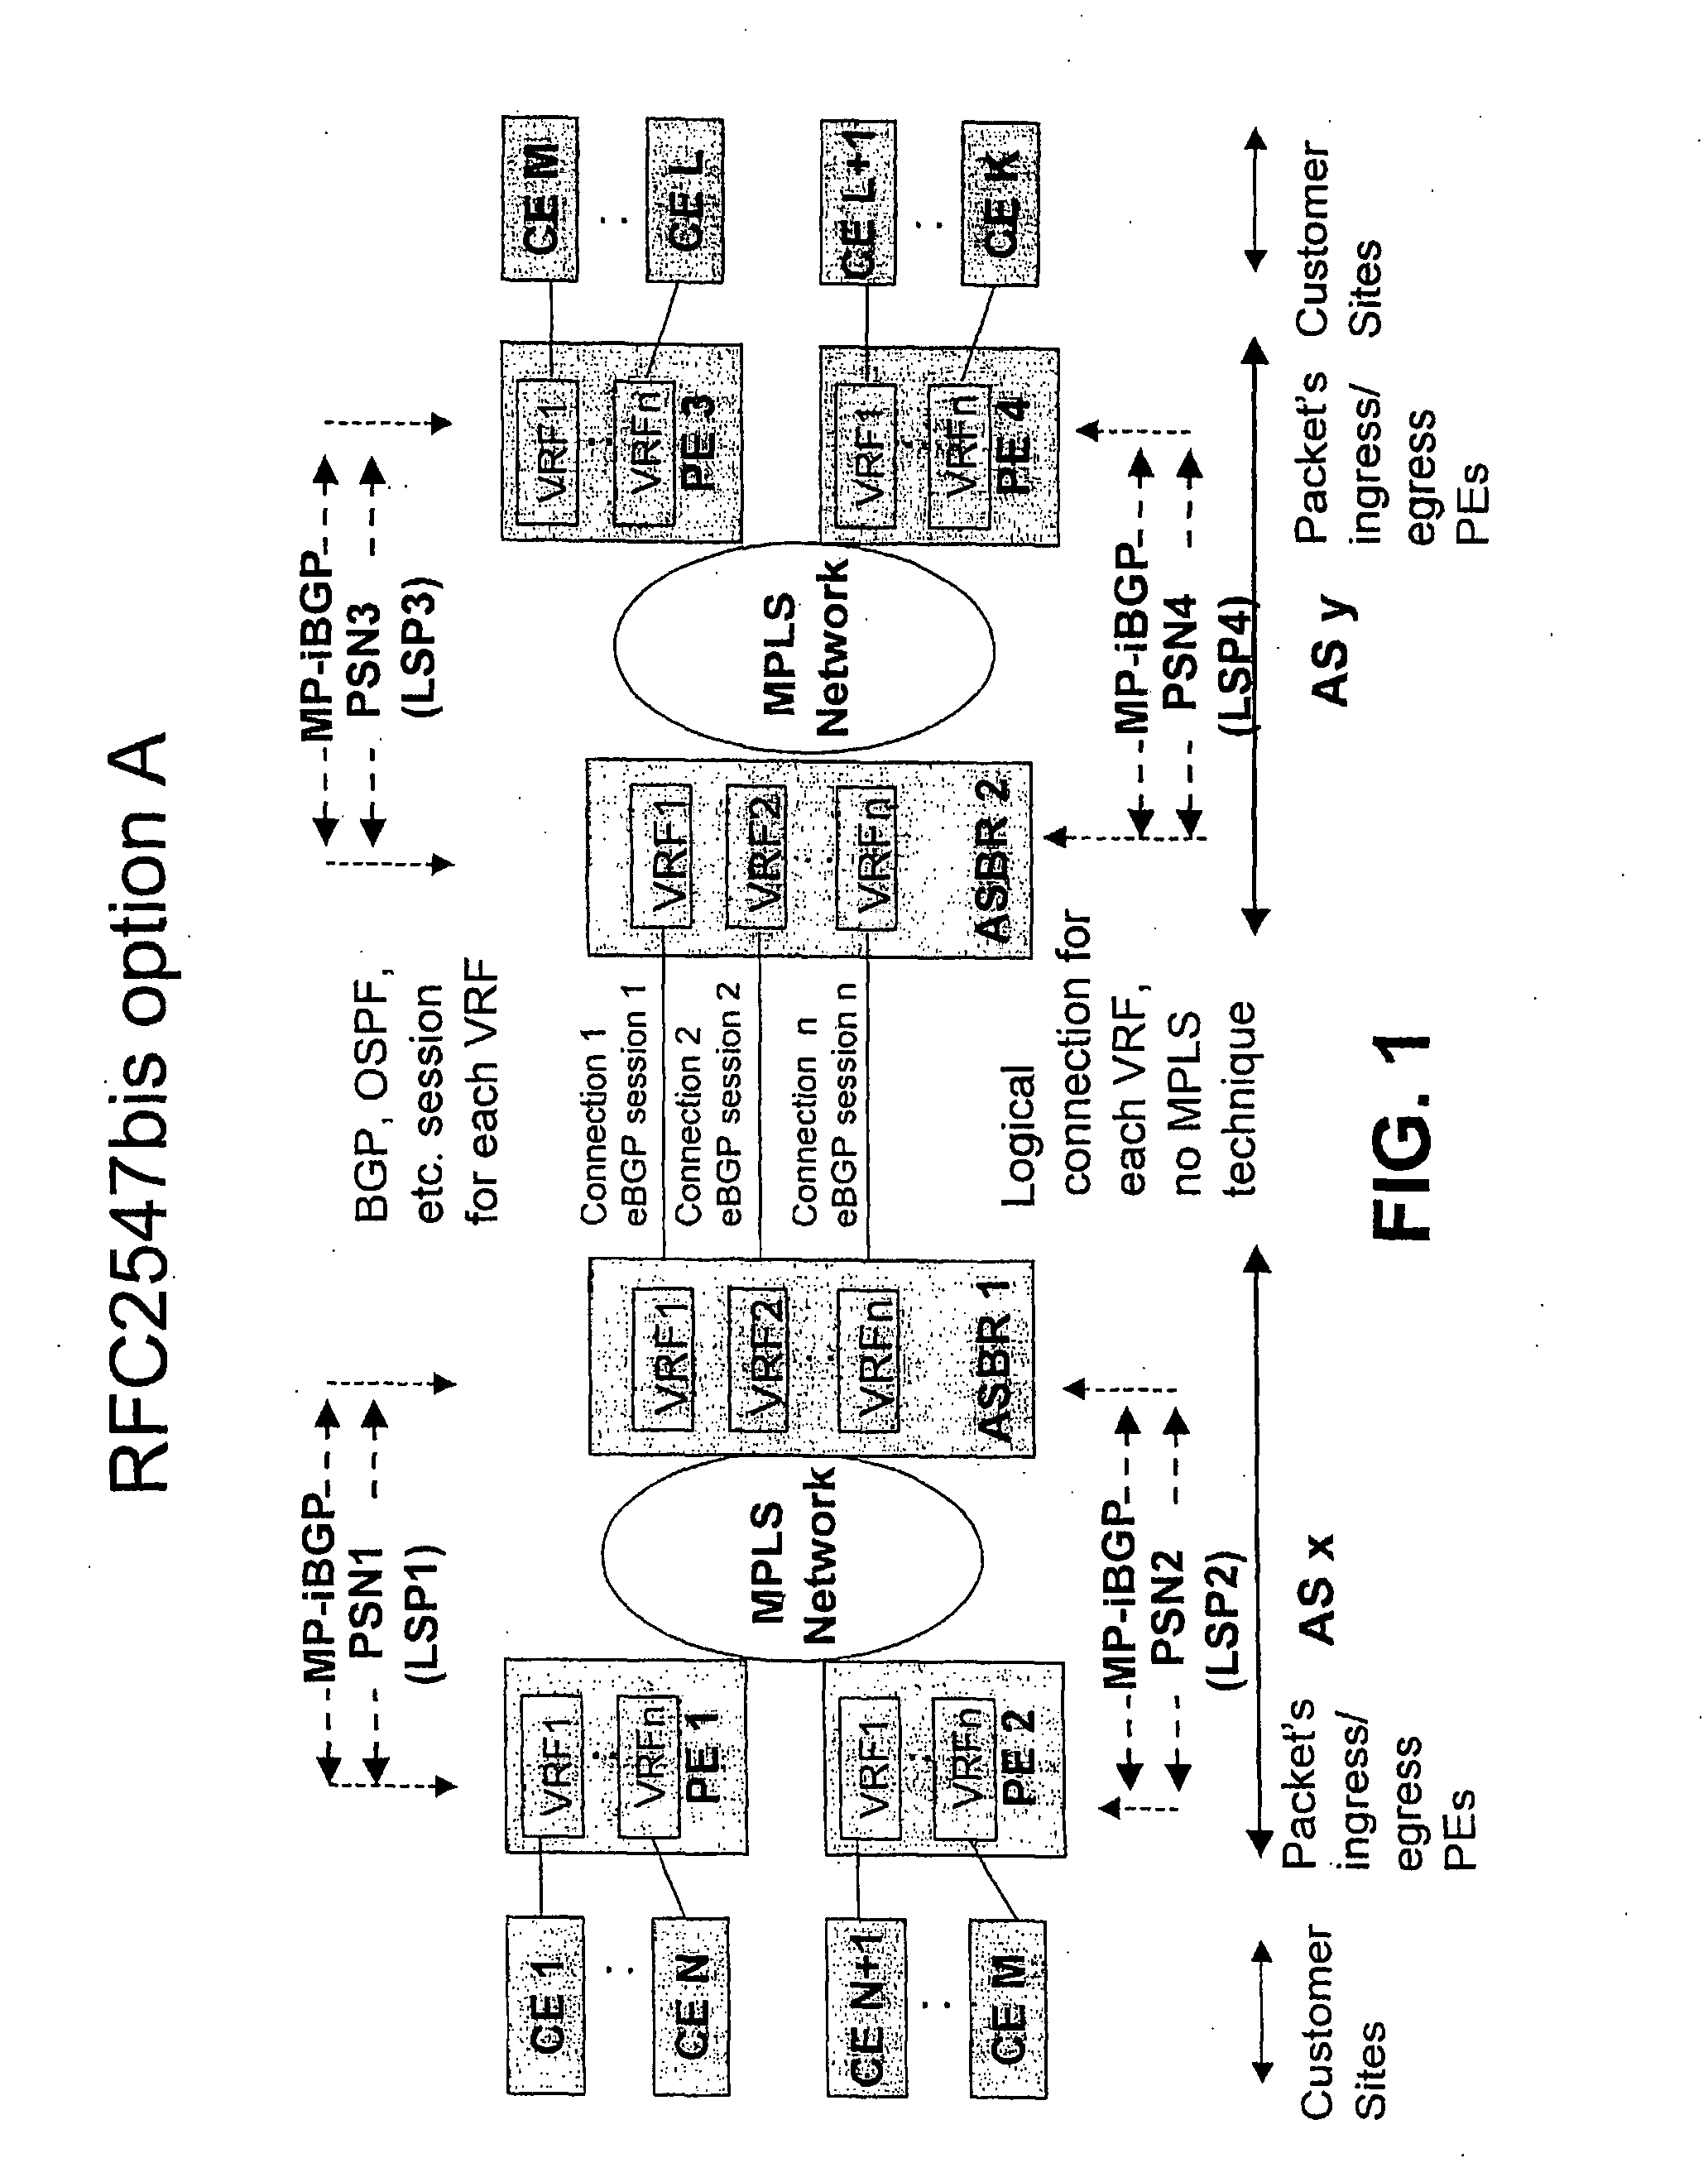 Method for Providing Virtual Private Network Services Between Autonomous Systems